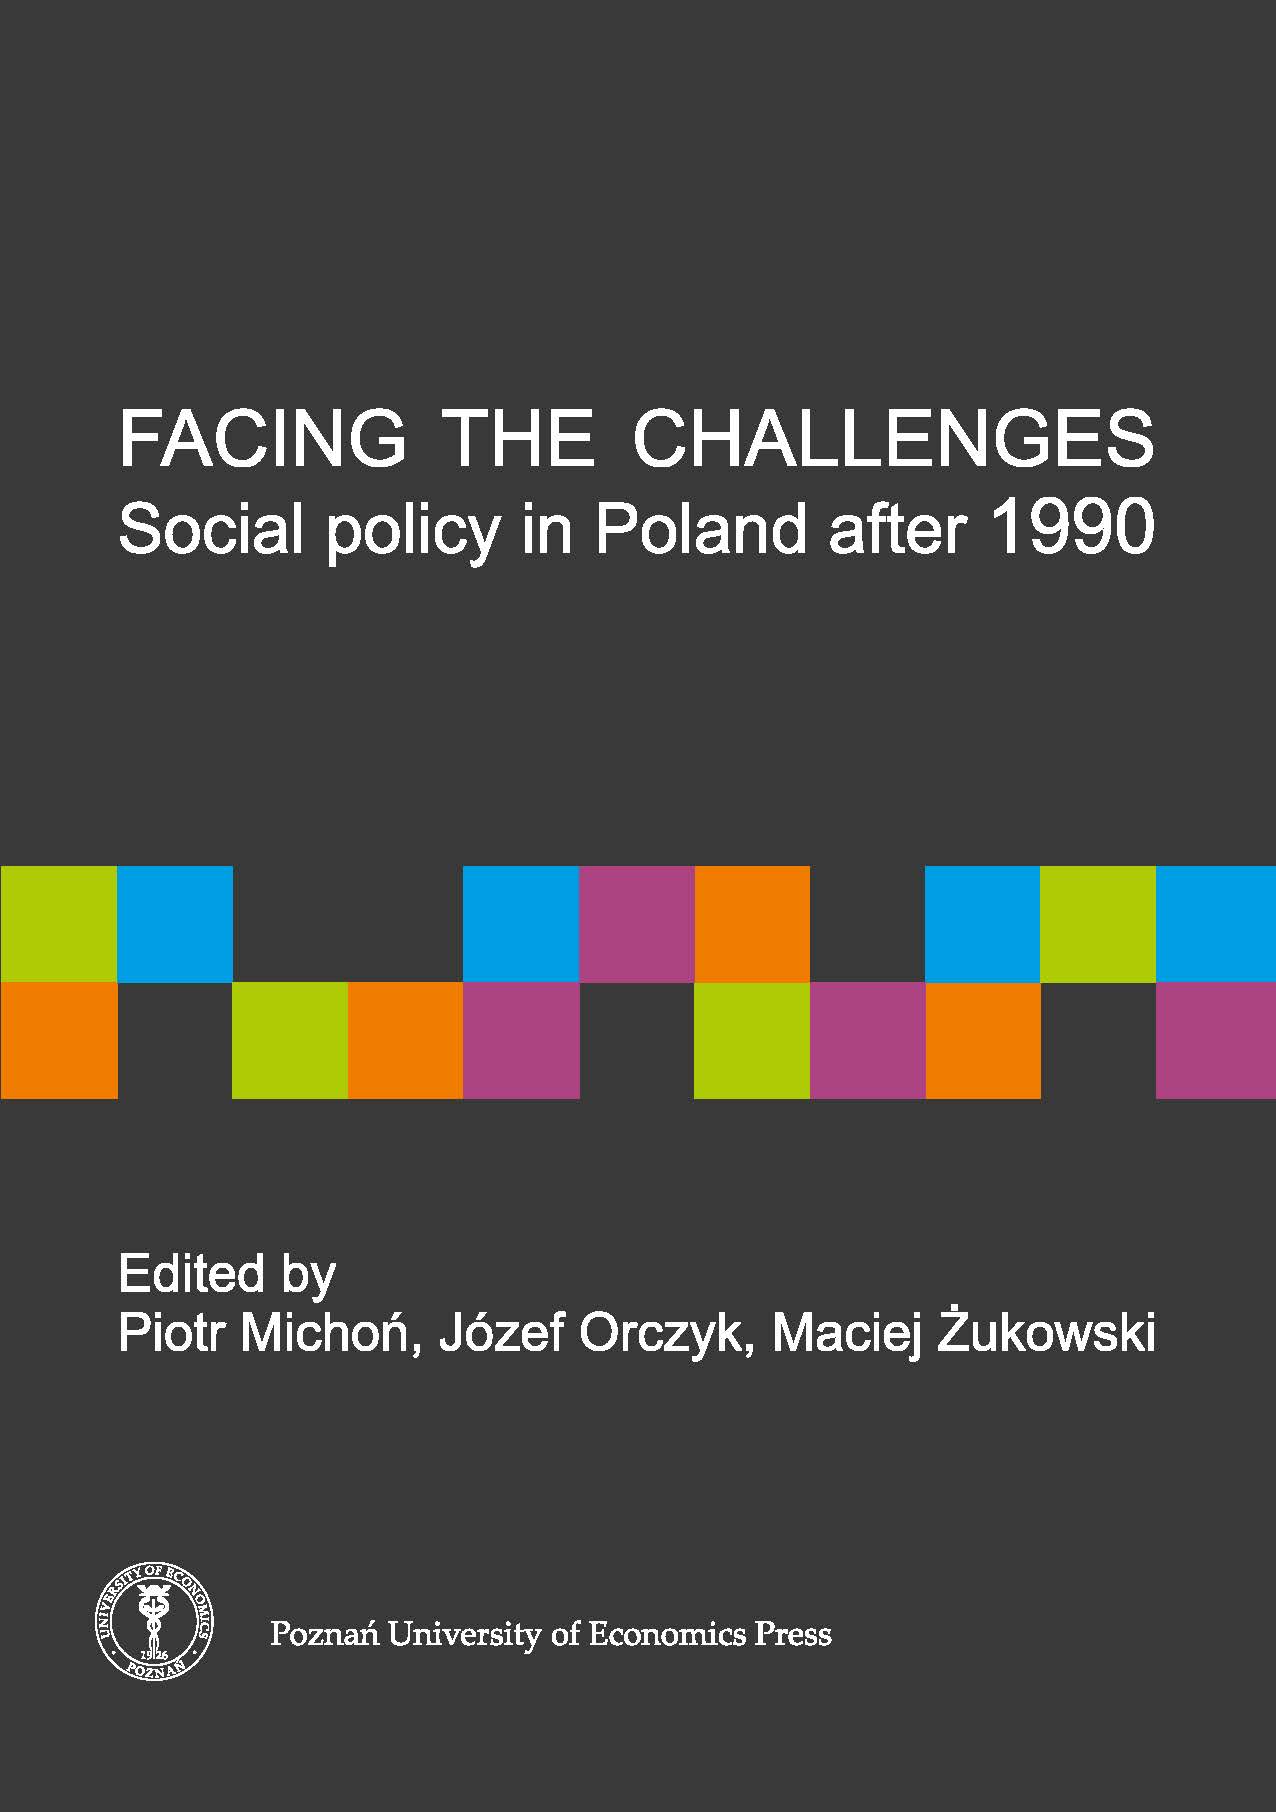 Facing the challenges: social policy in Poland after 1990